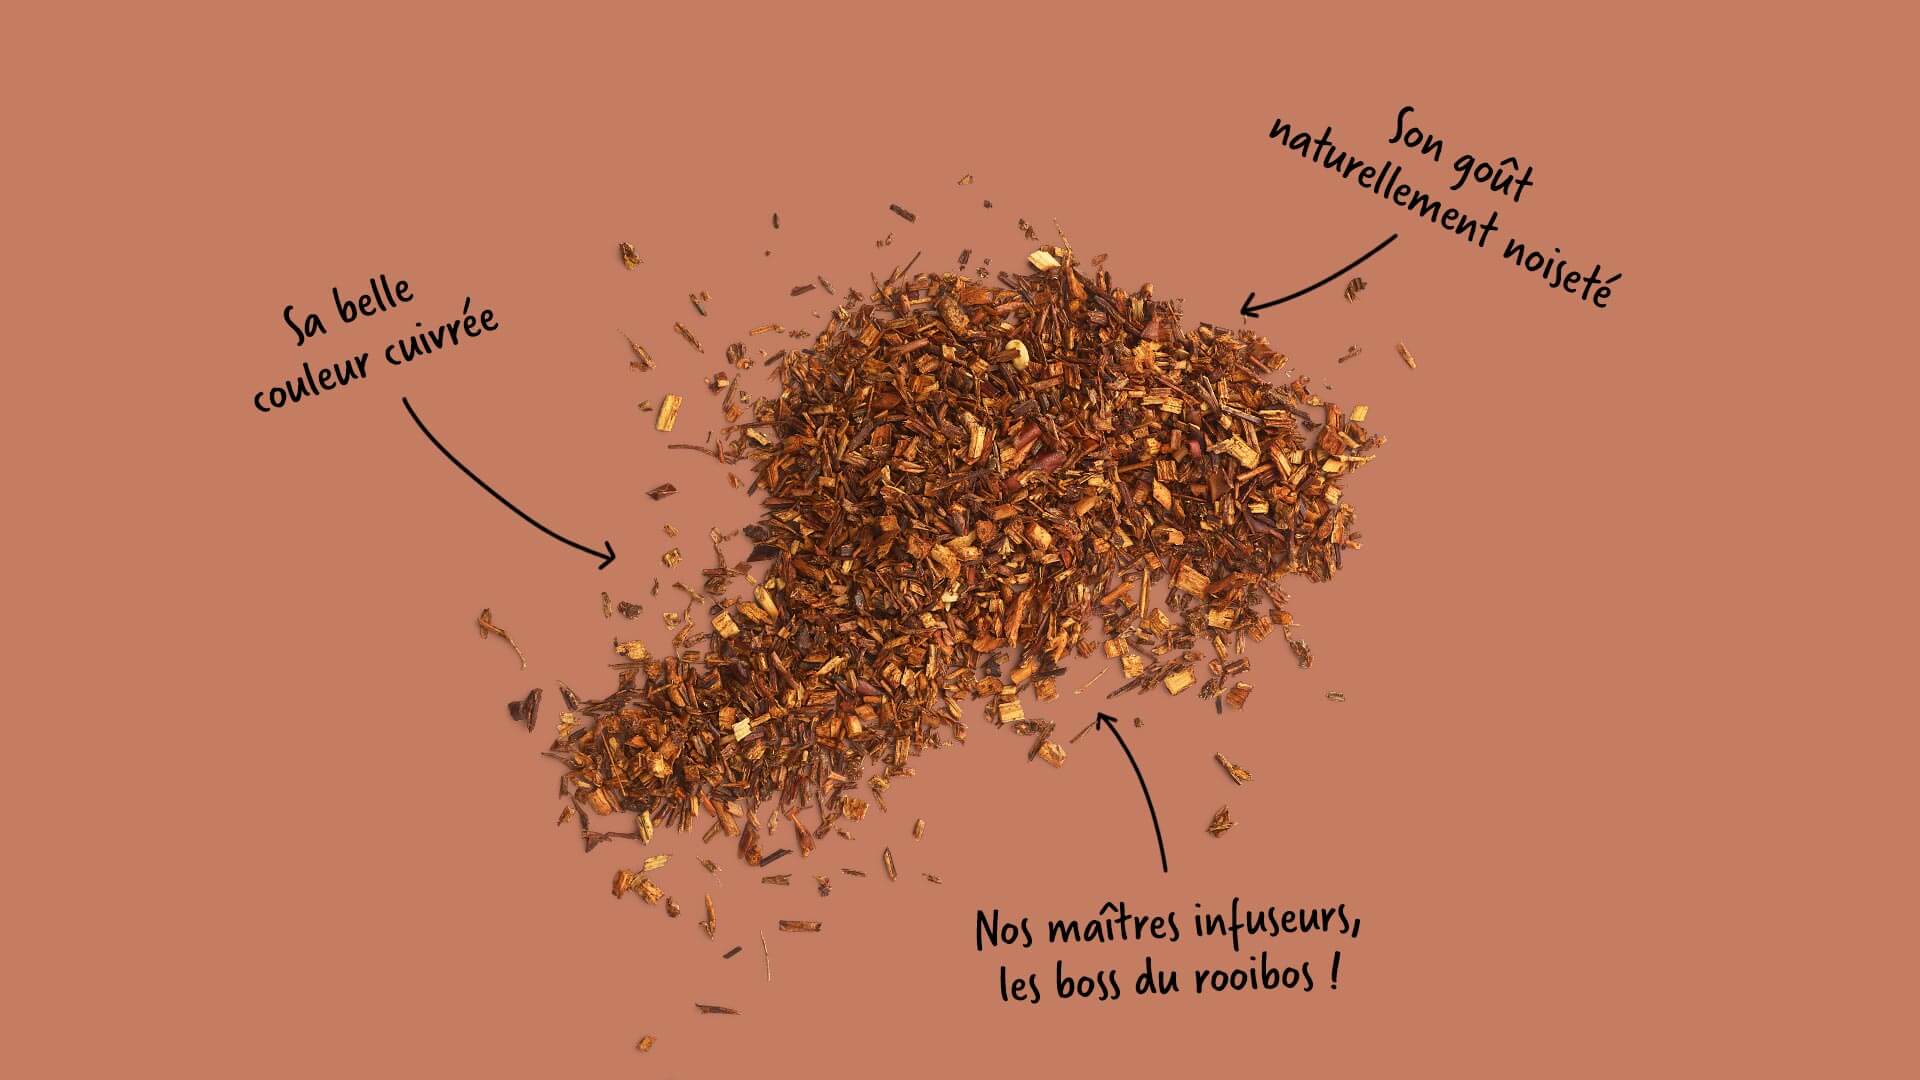 Dried rooibos is not a tea, but is used in herbal blends